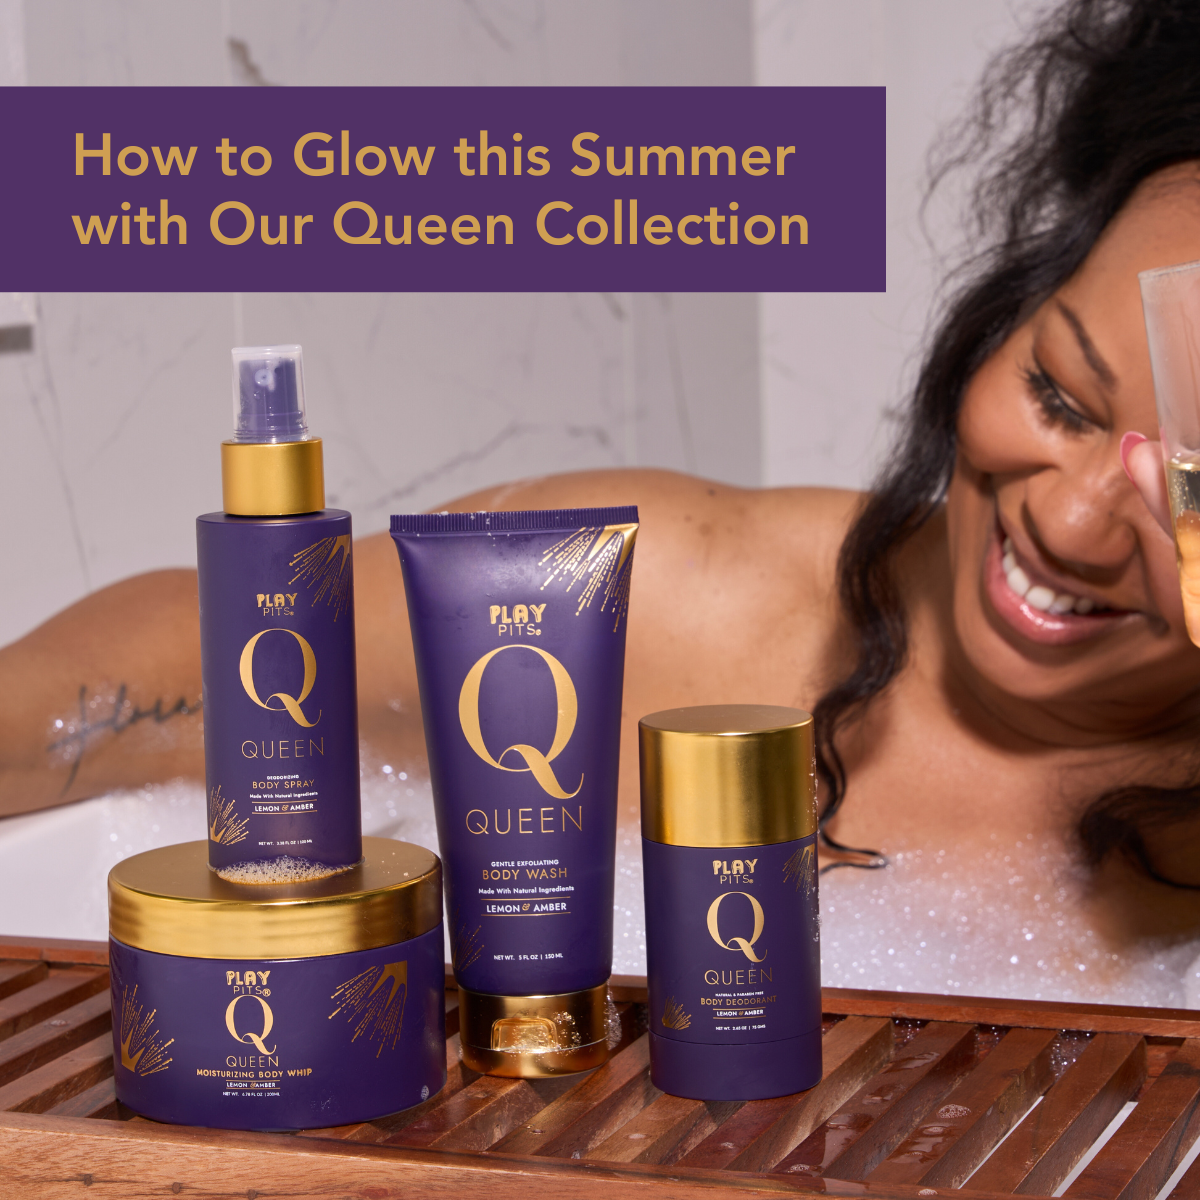 How to Glow this Summer with Our Queen Collection